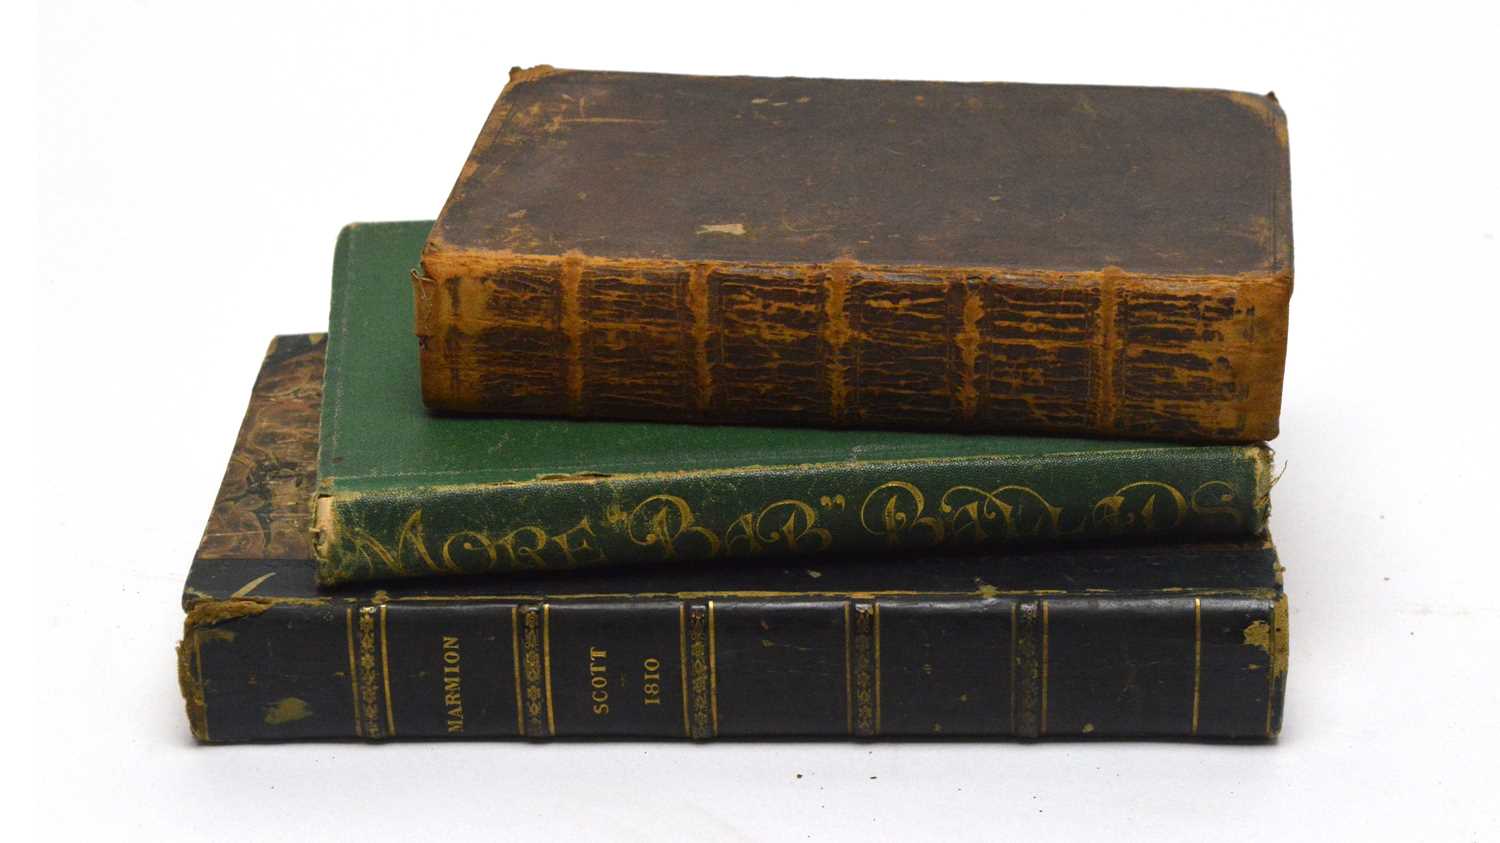 Lot 39 - Books on Songs and Ballads.